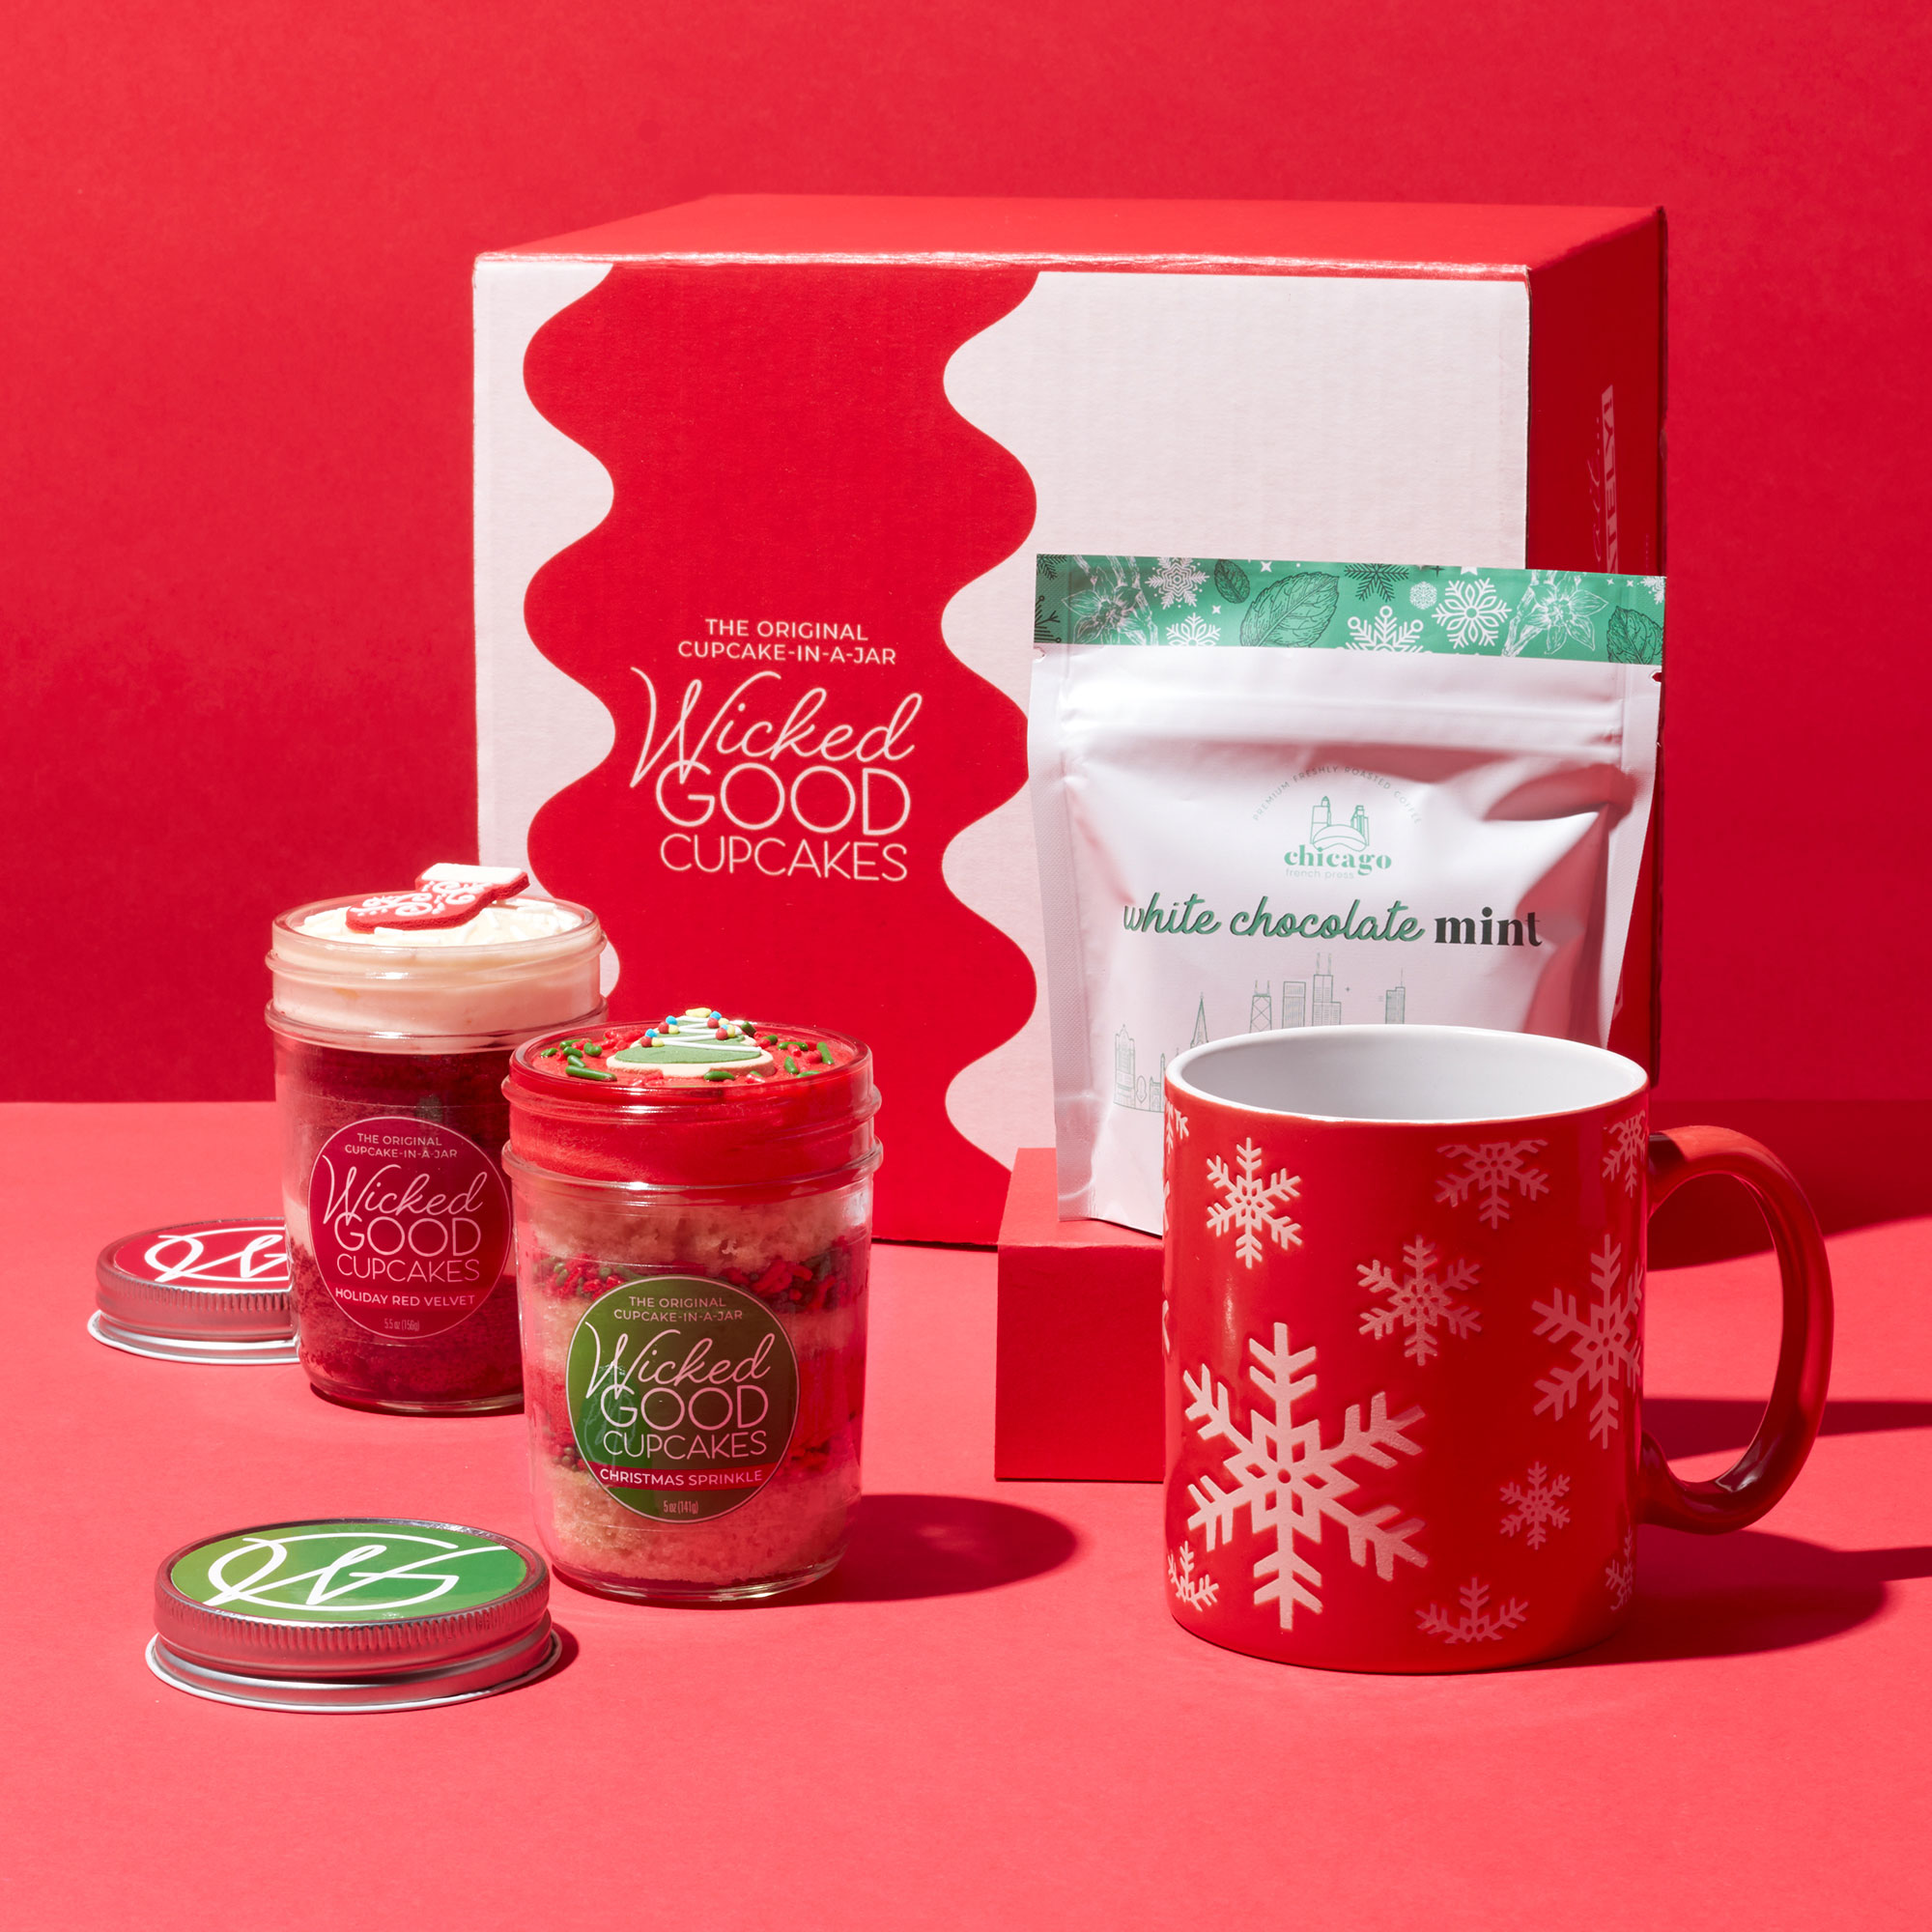 https://www.wickedgoodcupcakes.com/on/demandware.static/-/Sites-Web-Master-Catalog/default/dwda4fc45a/images/products/holiday-cupcake-2pack-coffee-gift-set-005902-1.jpg?sw=1200&sh=628&sm=fit